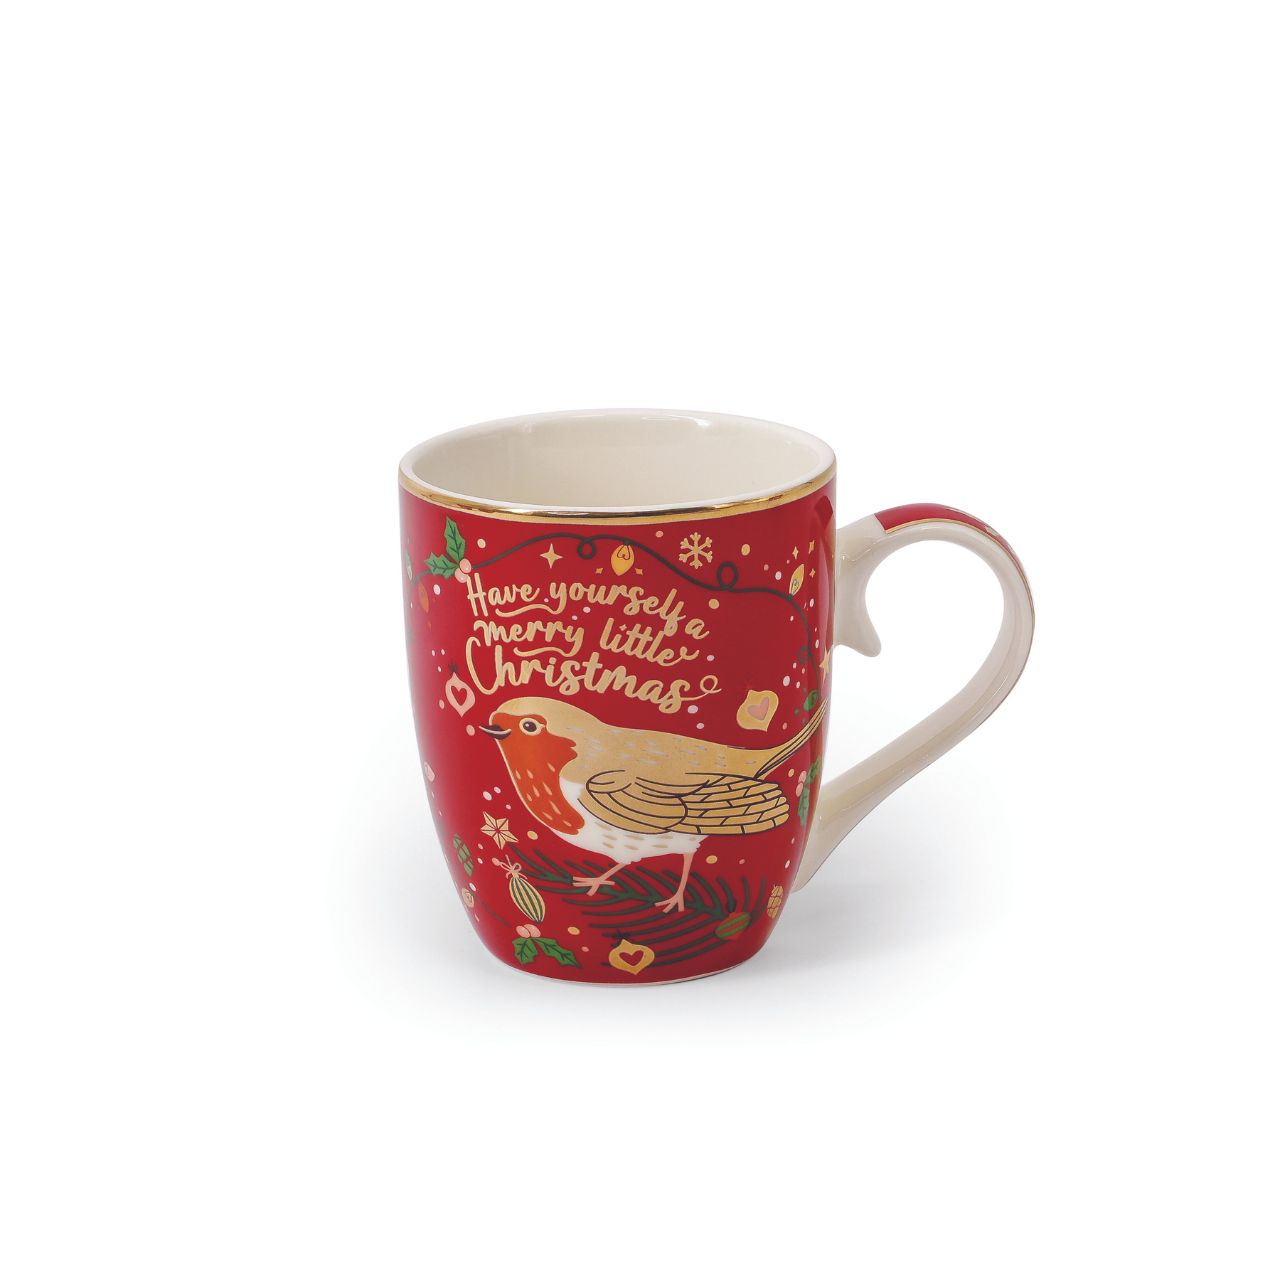 Christmas Robin Set of 4 Mugs by Tipperary  This set of four festive mugs will add seasonal cheer to your kitchen. Crafted from high-quality ceramic, each mug features a unique design of red and gold Christmas Robins. Enjoy your favourite hot beverage this holiday season with the Tipperary Christmas Robin Set of 4 Mugs.